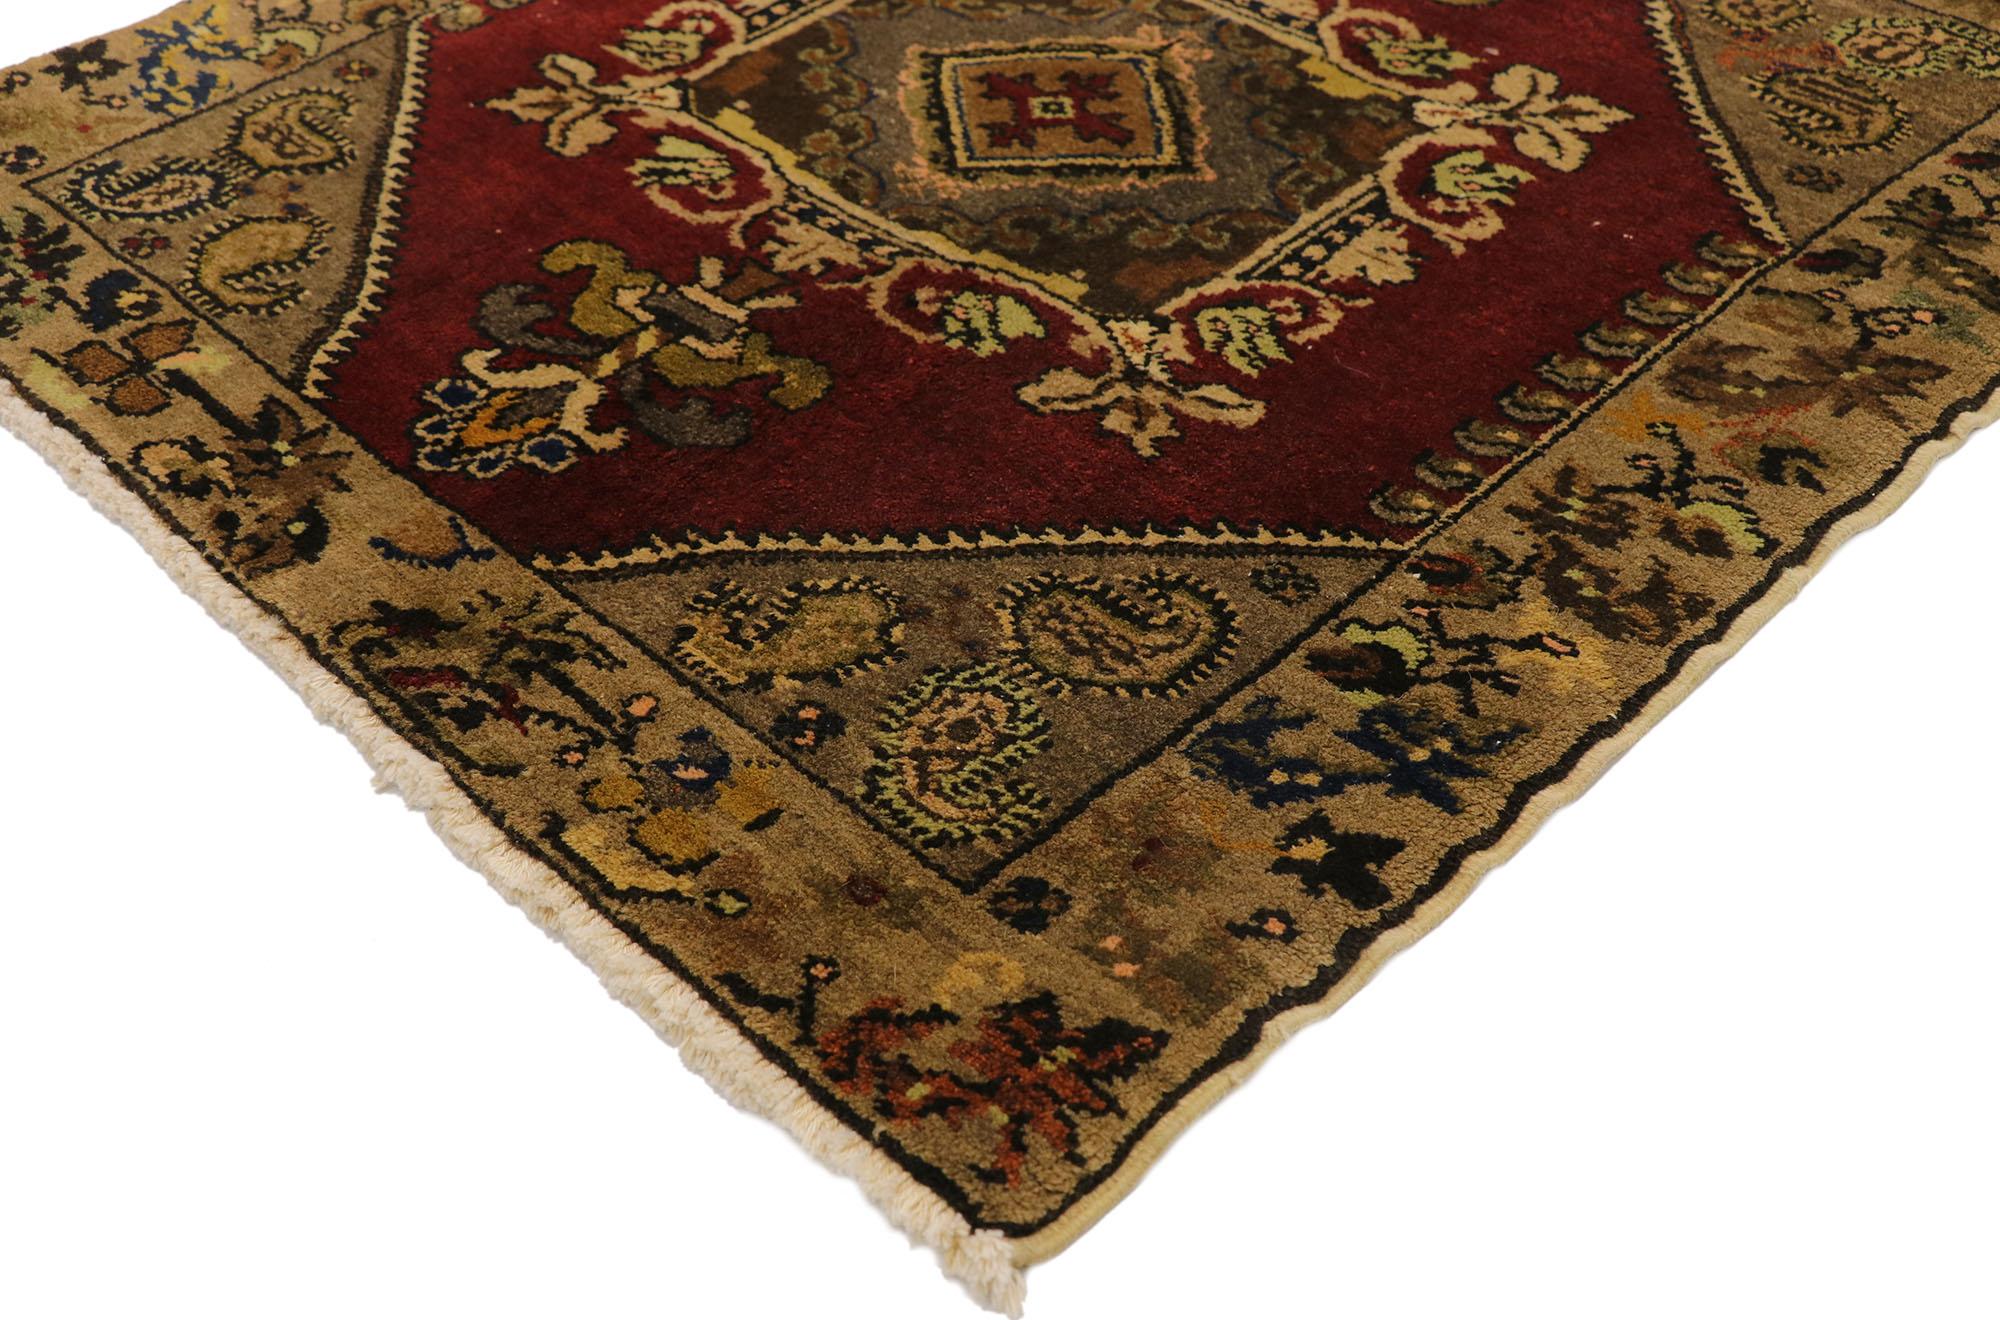 Pair of Vintage Turkish Oushak Yastik Scatter Rugs, Matching Small Accent Rugs 4